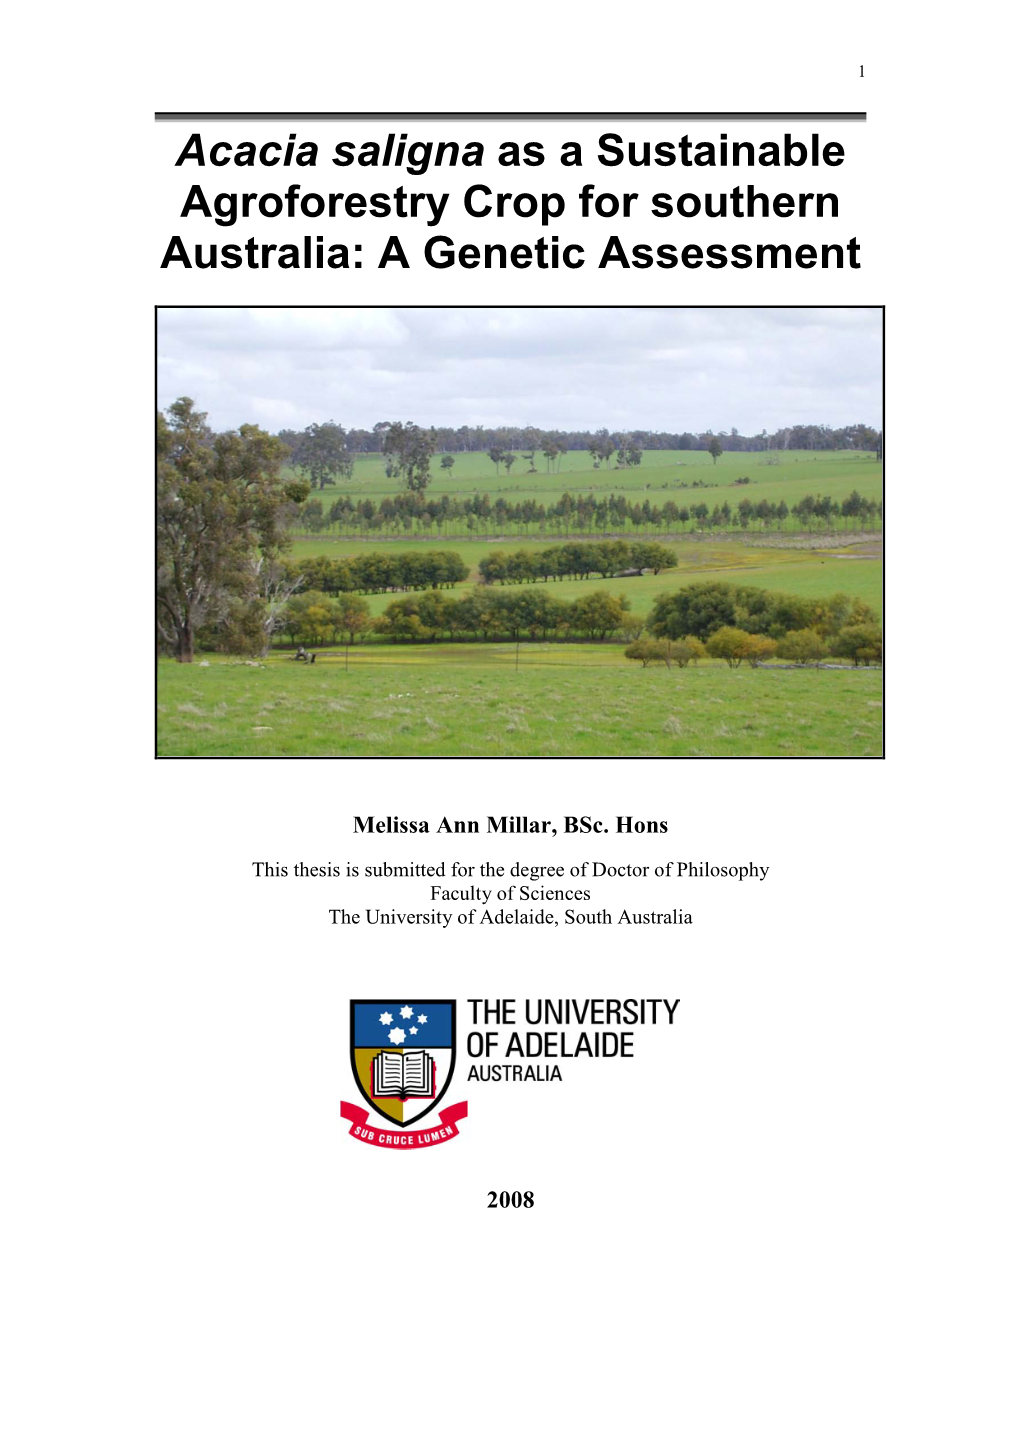 Acacia Saligna As a Sustainable Agroforestry Crop for Southern Australia: a Genetic Assessment